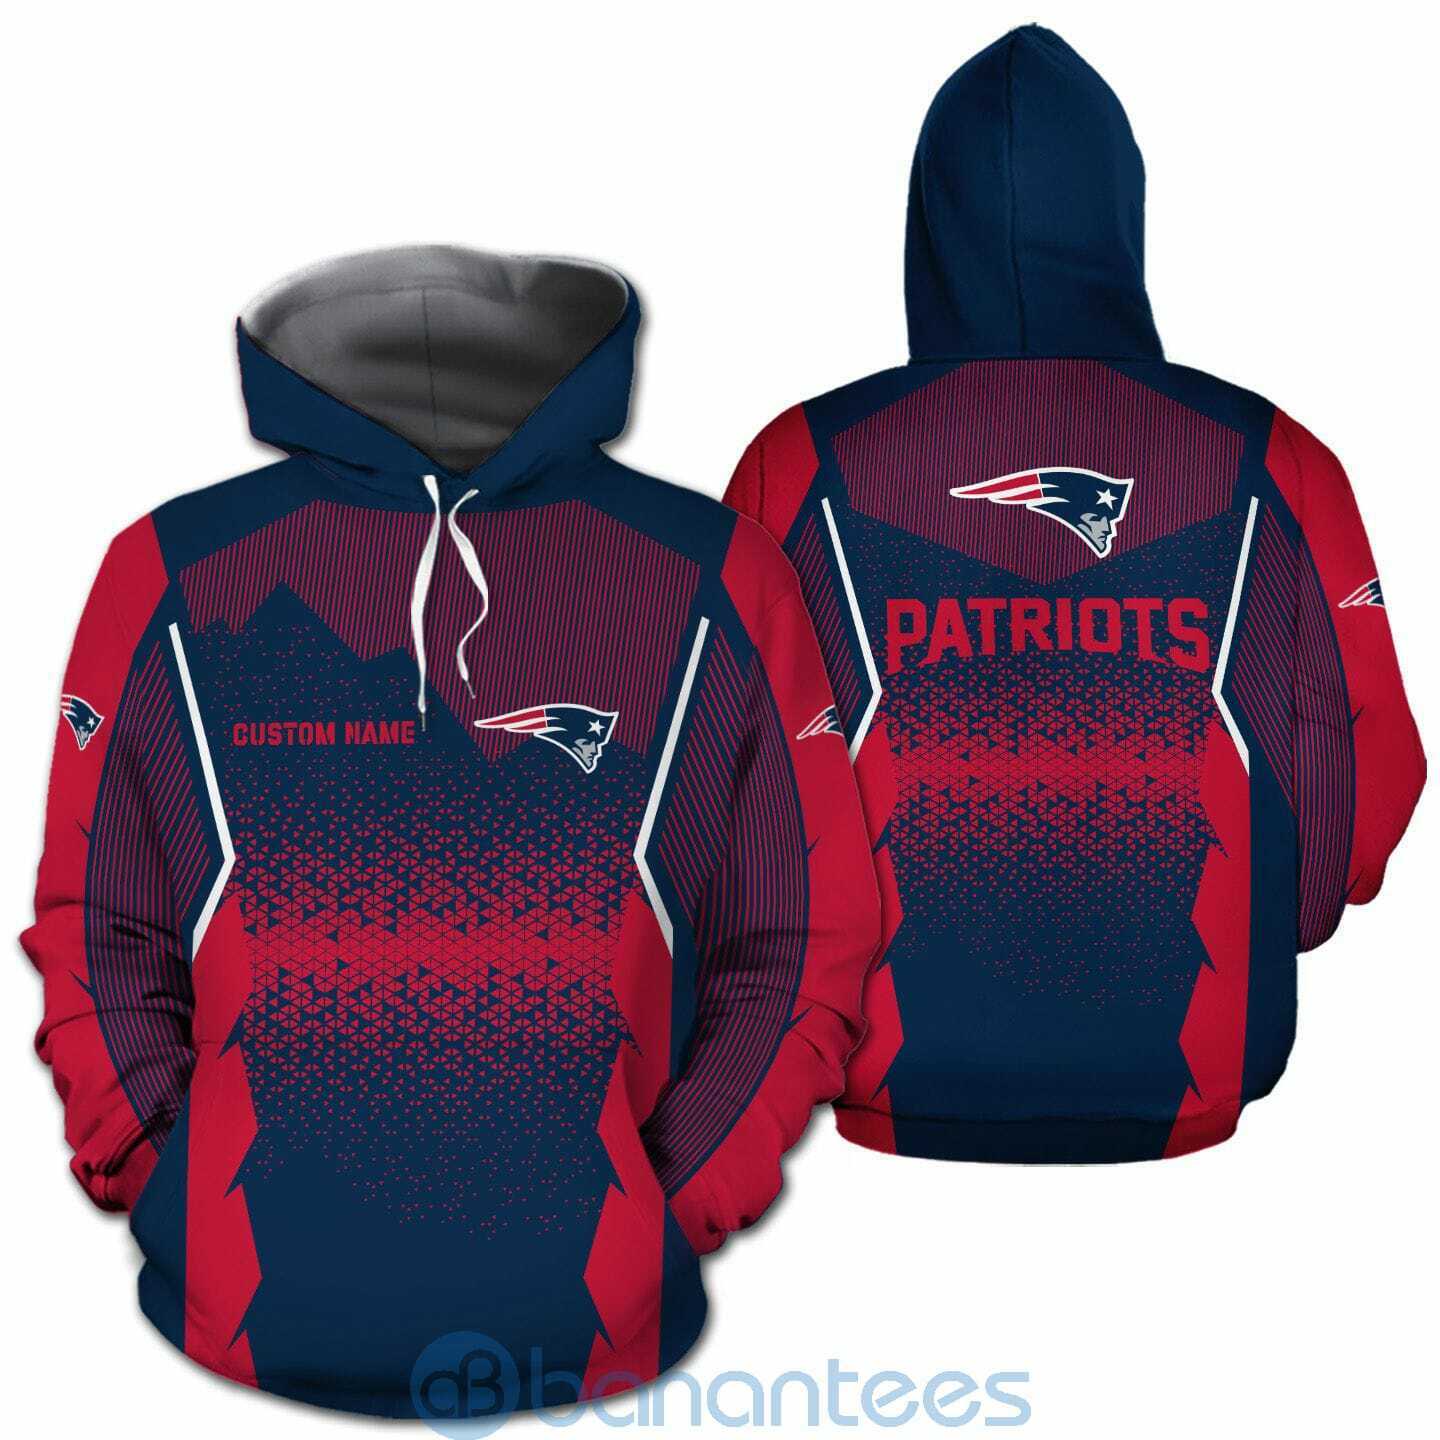 New England Patriots NFL Football Team Custom Name 3D All Over Printed Shirt For Fans